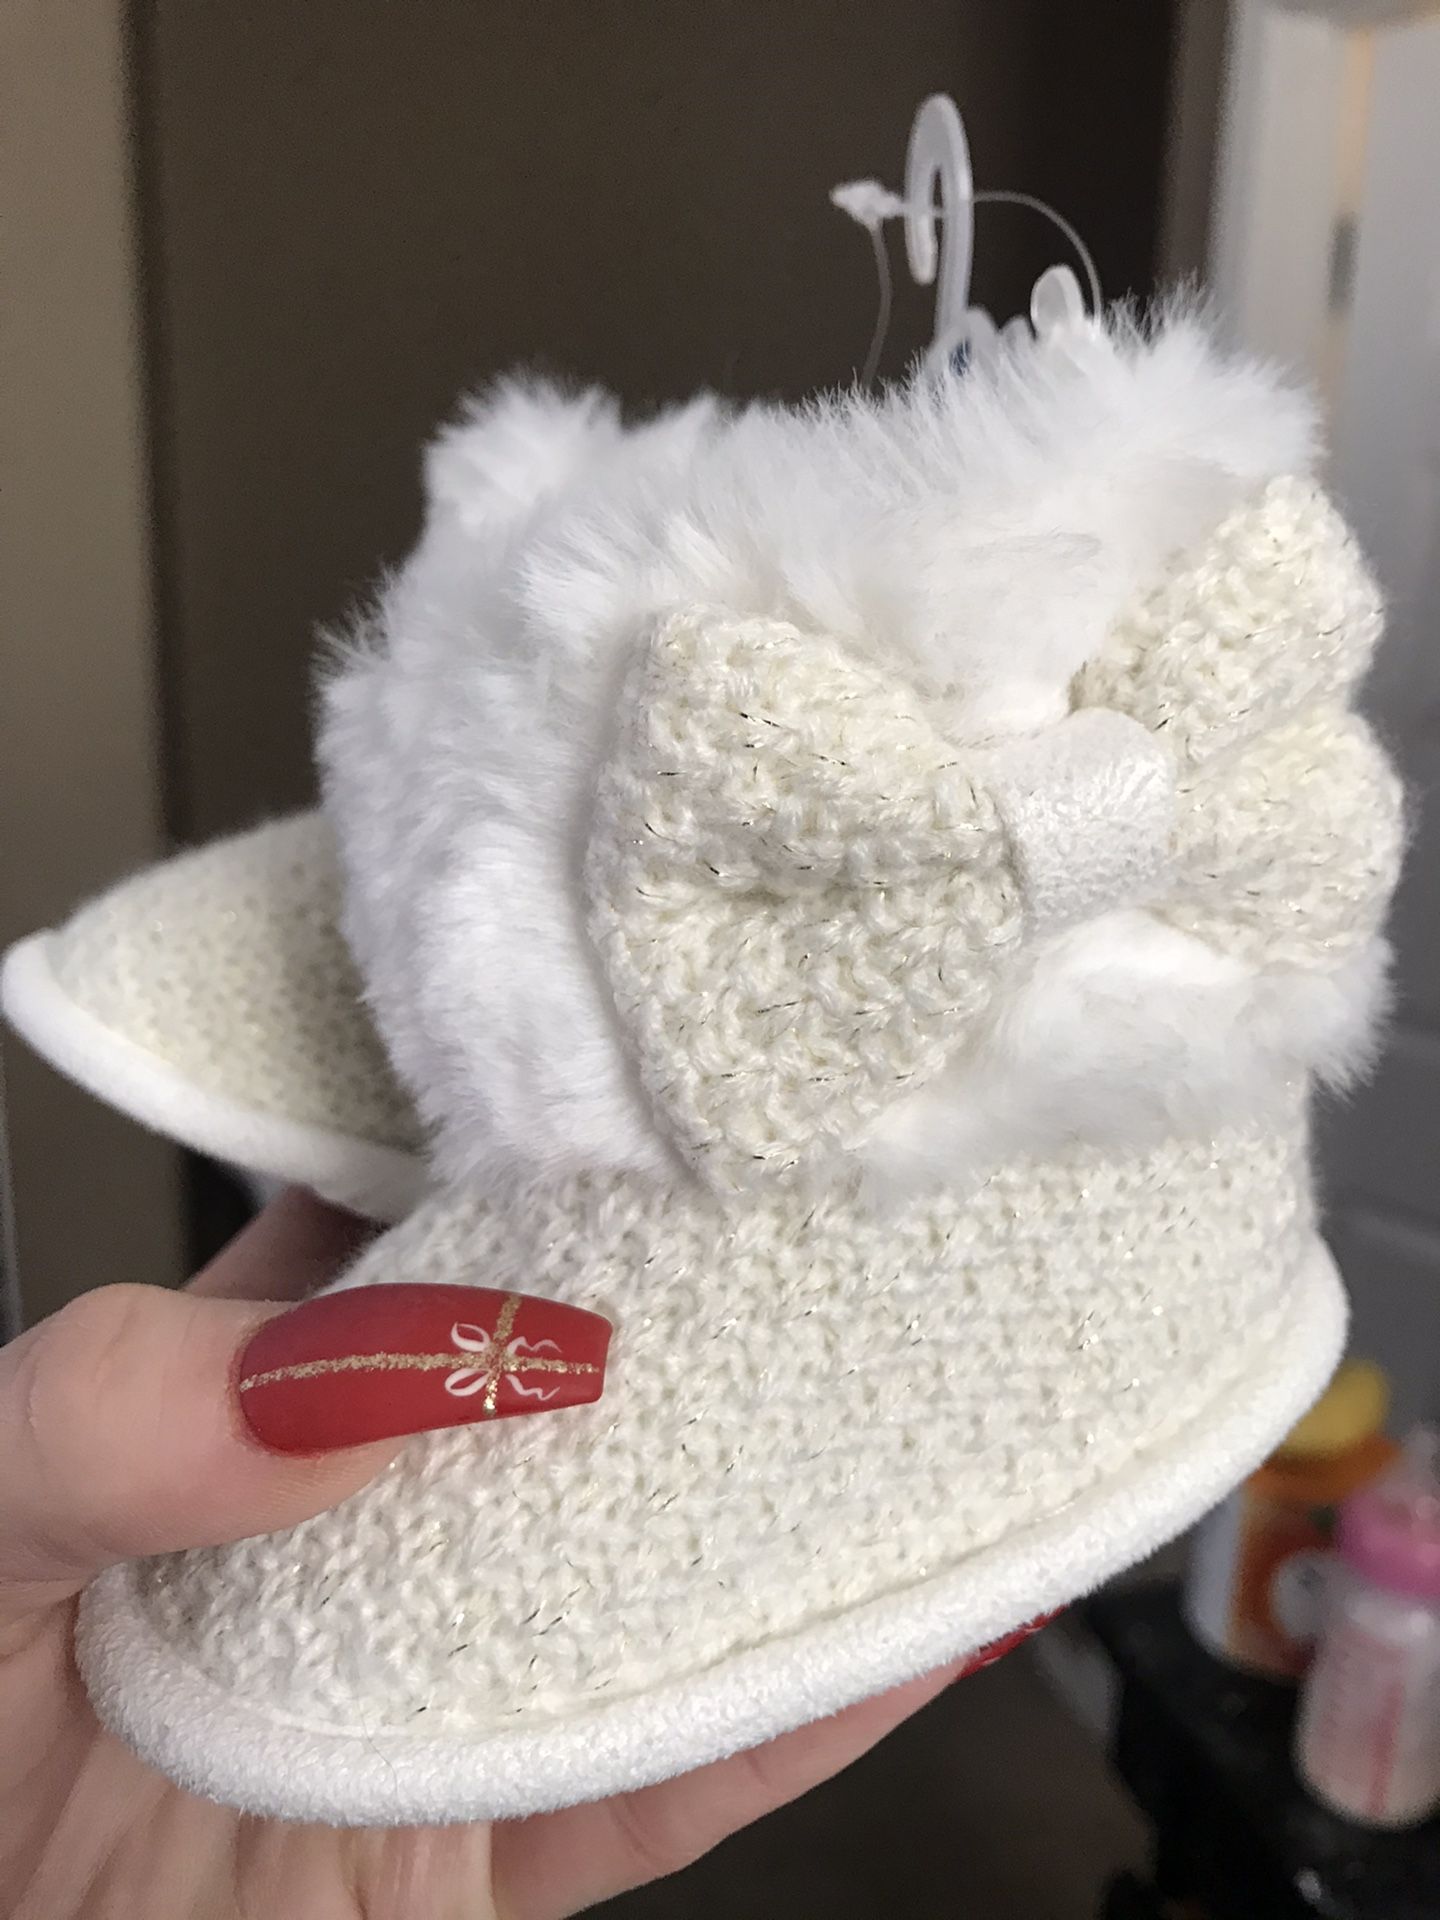 Brand new baby girl Boots!